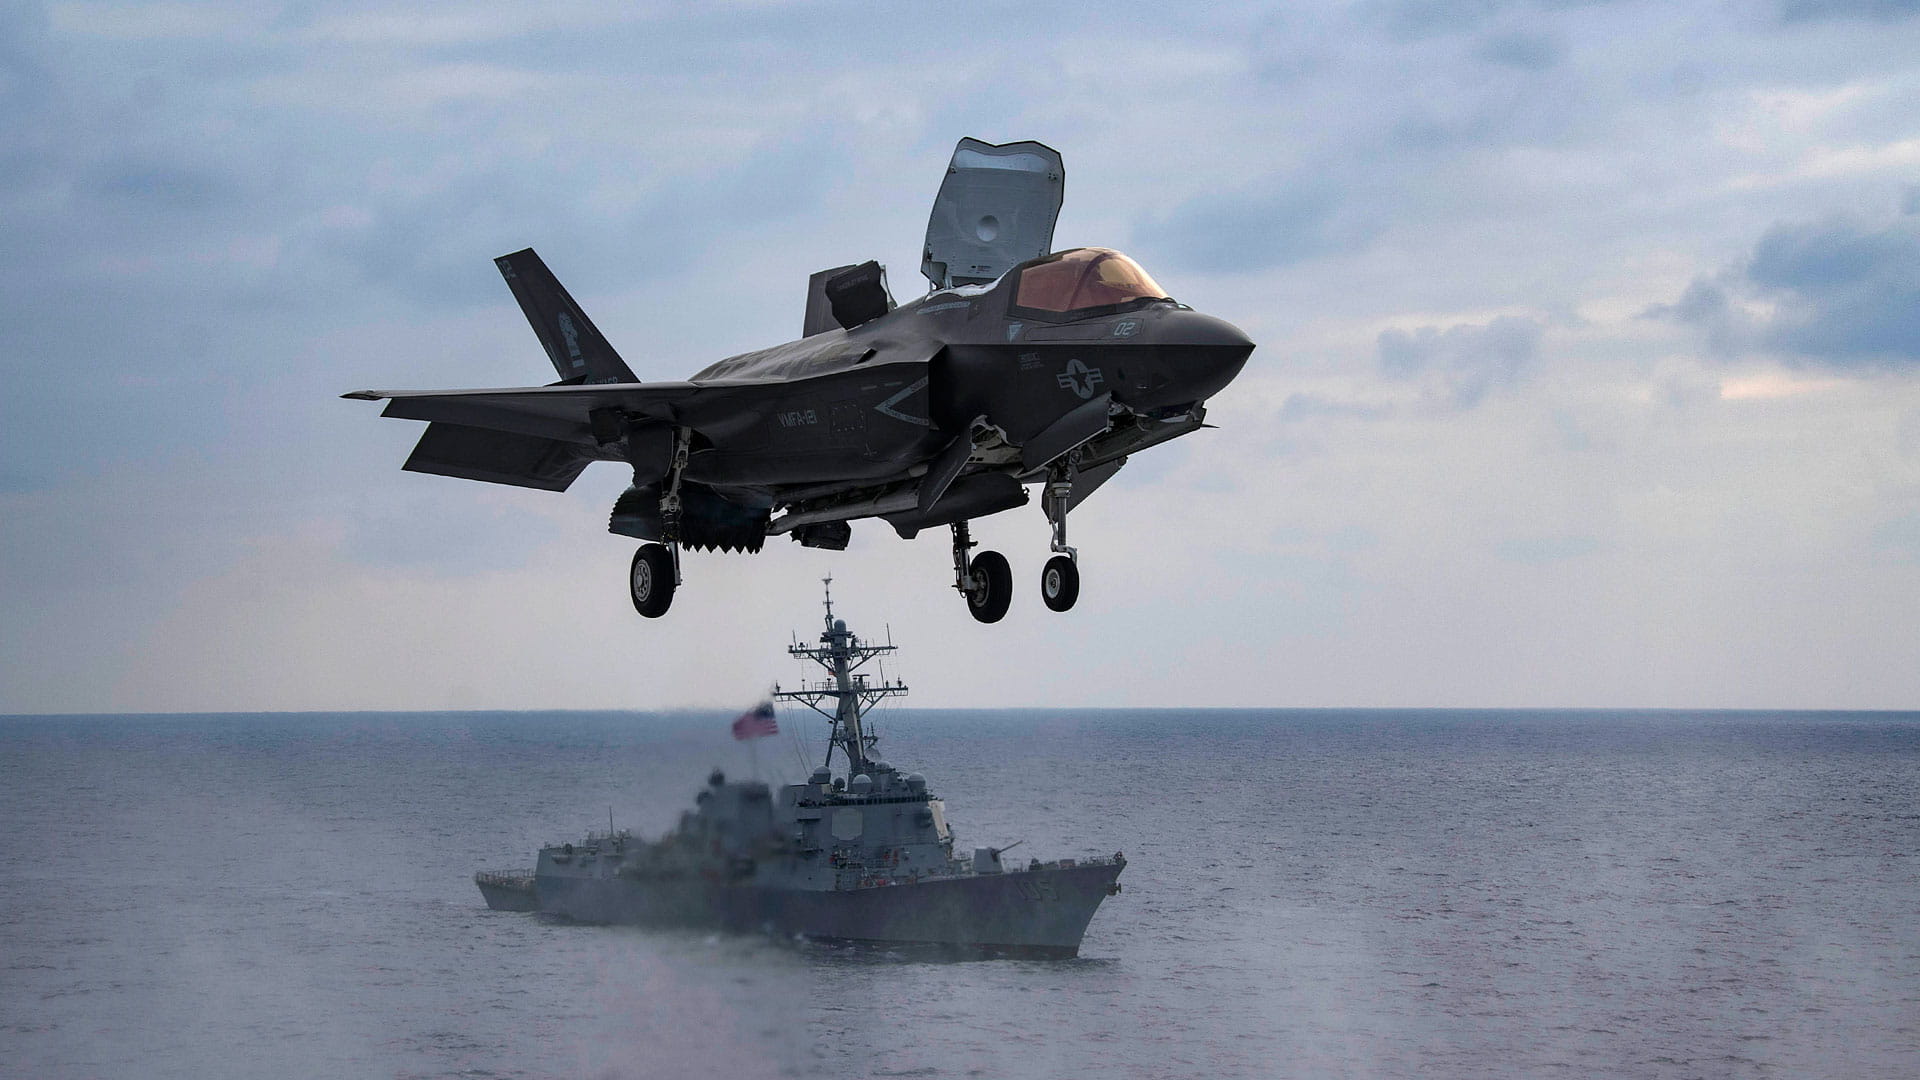 An F-35B Lightning II assigned to Marine Fighter Attack Squadron (VFMA) 121 takes off from the amphibious assault ship USS Wasp (LHD 1) following an expeditionary strike exercise in the Philippines on April 18, 2018. Photo by Mass Communication Specialist 1st Class Daniel Barker/Released